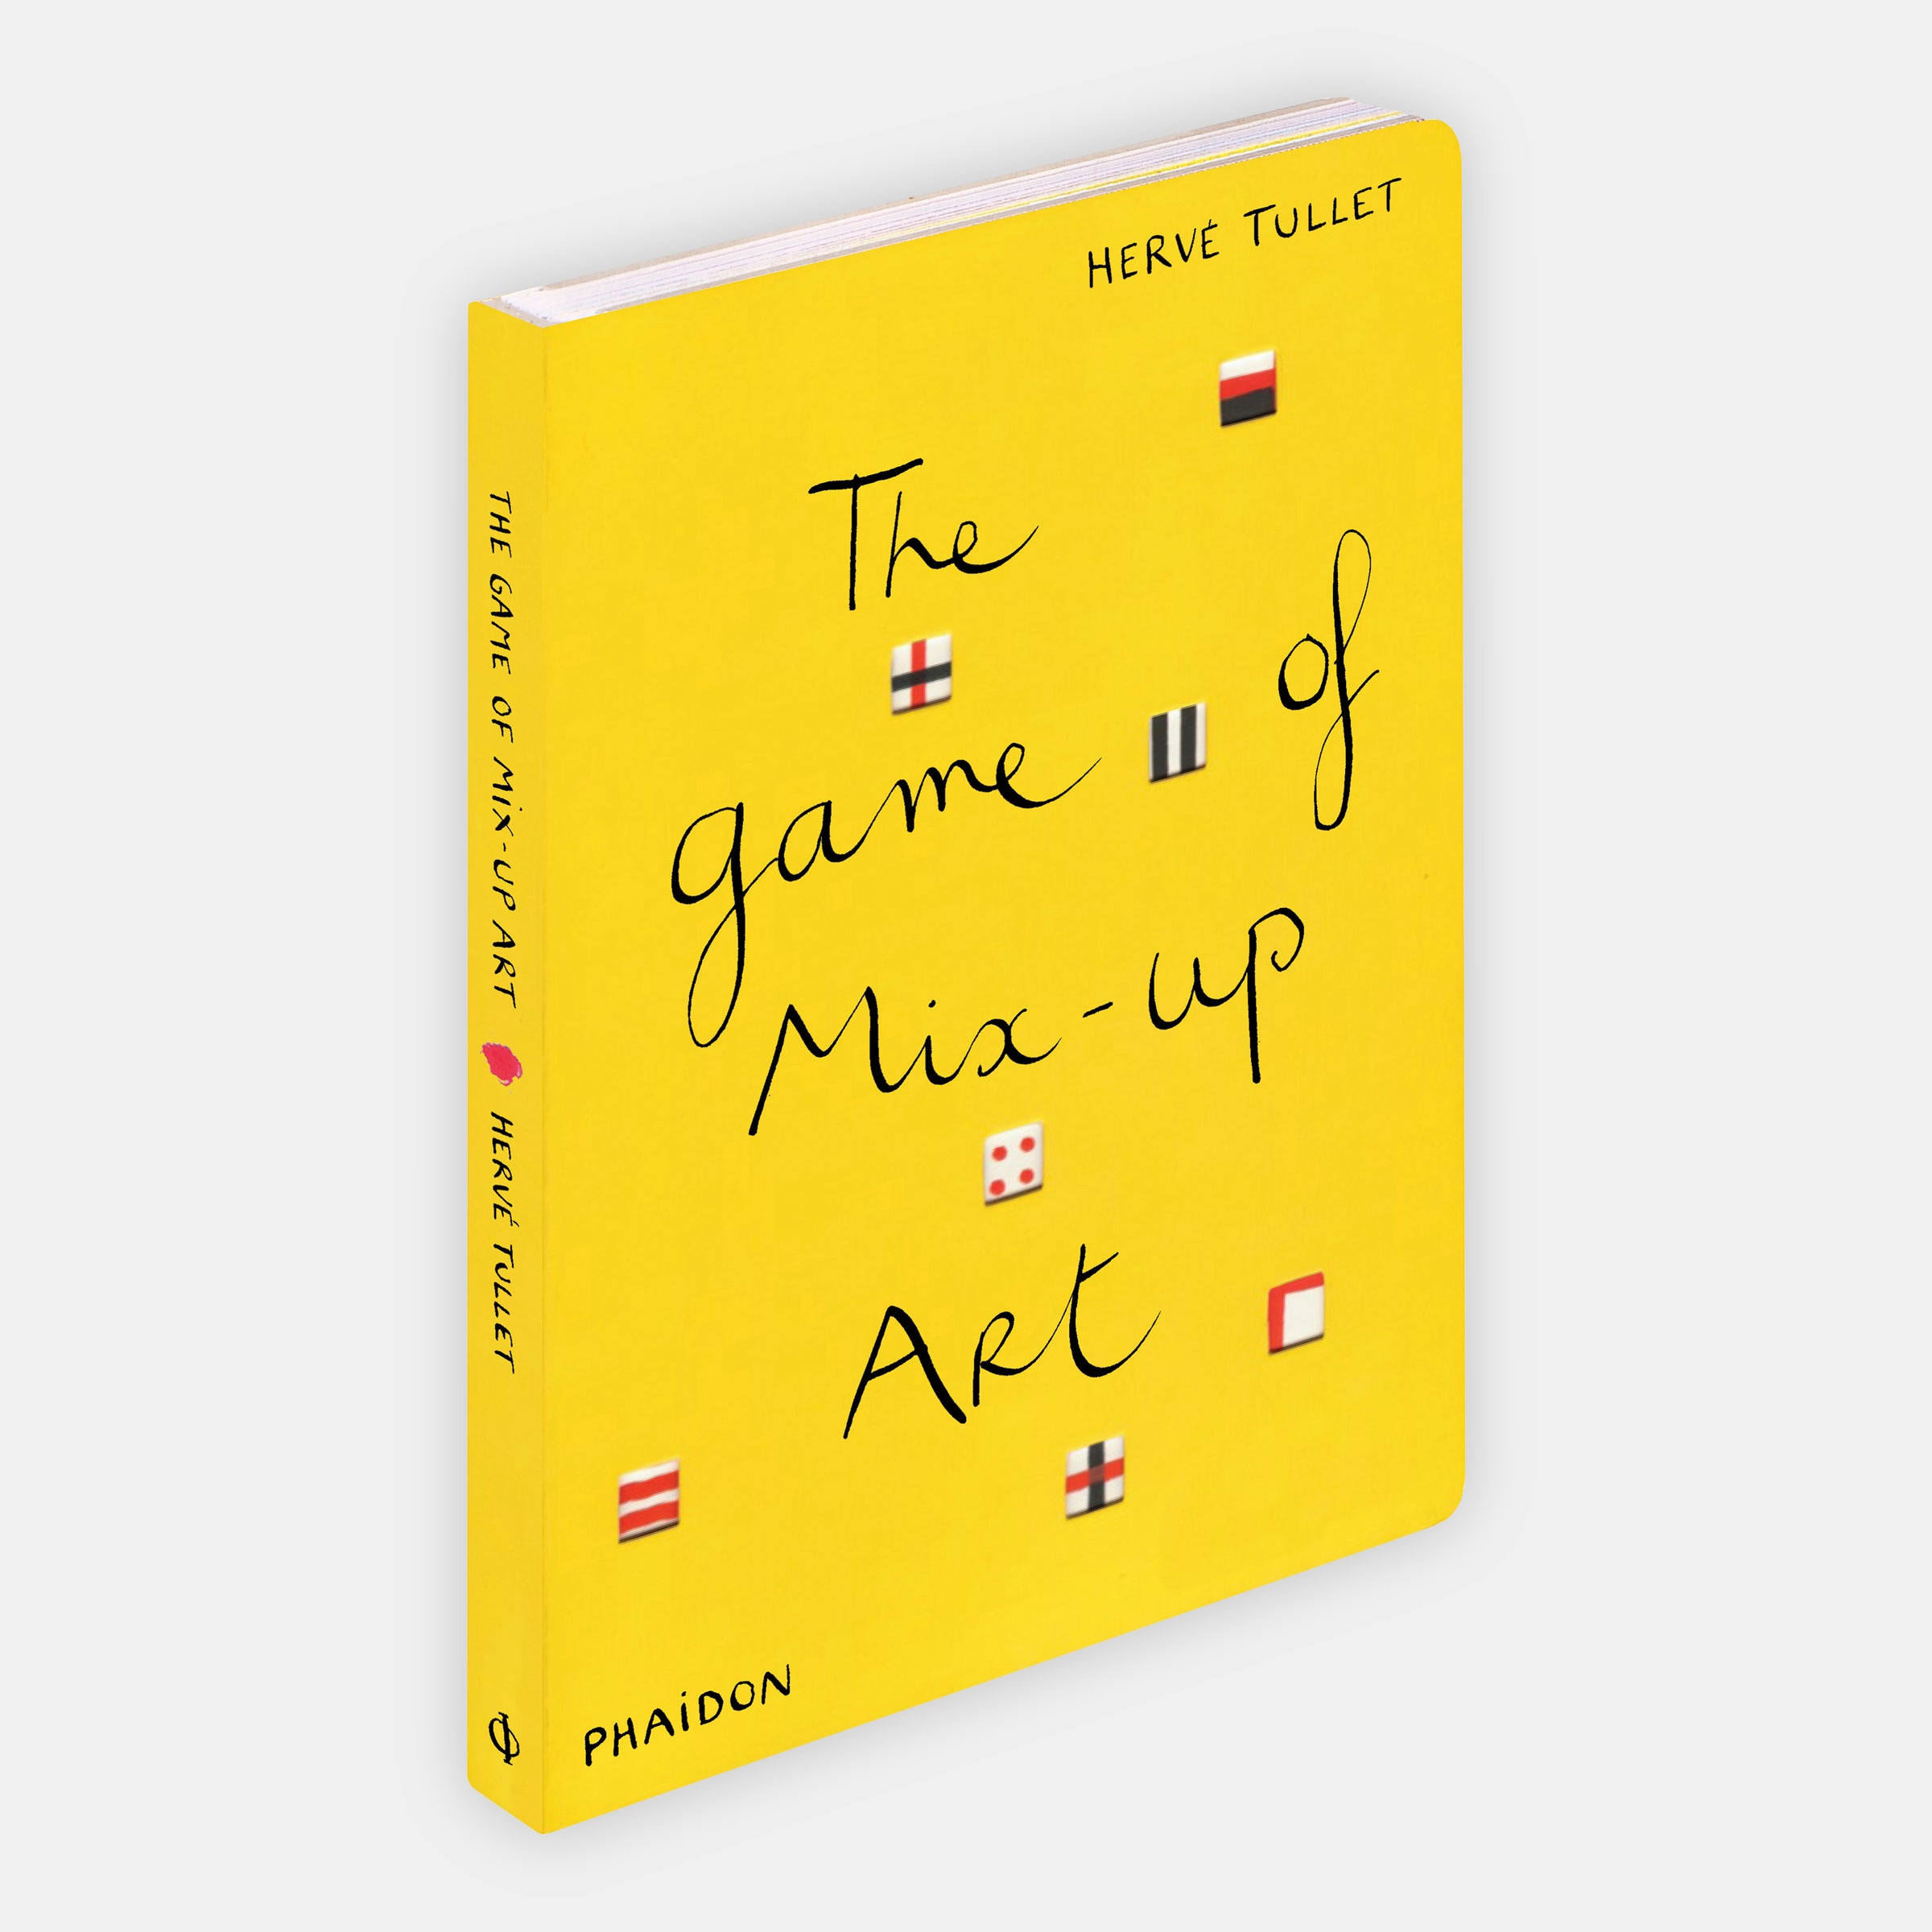 Phaidon children's book with bright yellow cover and cursive title - The Game of Mix-Up Art